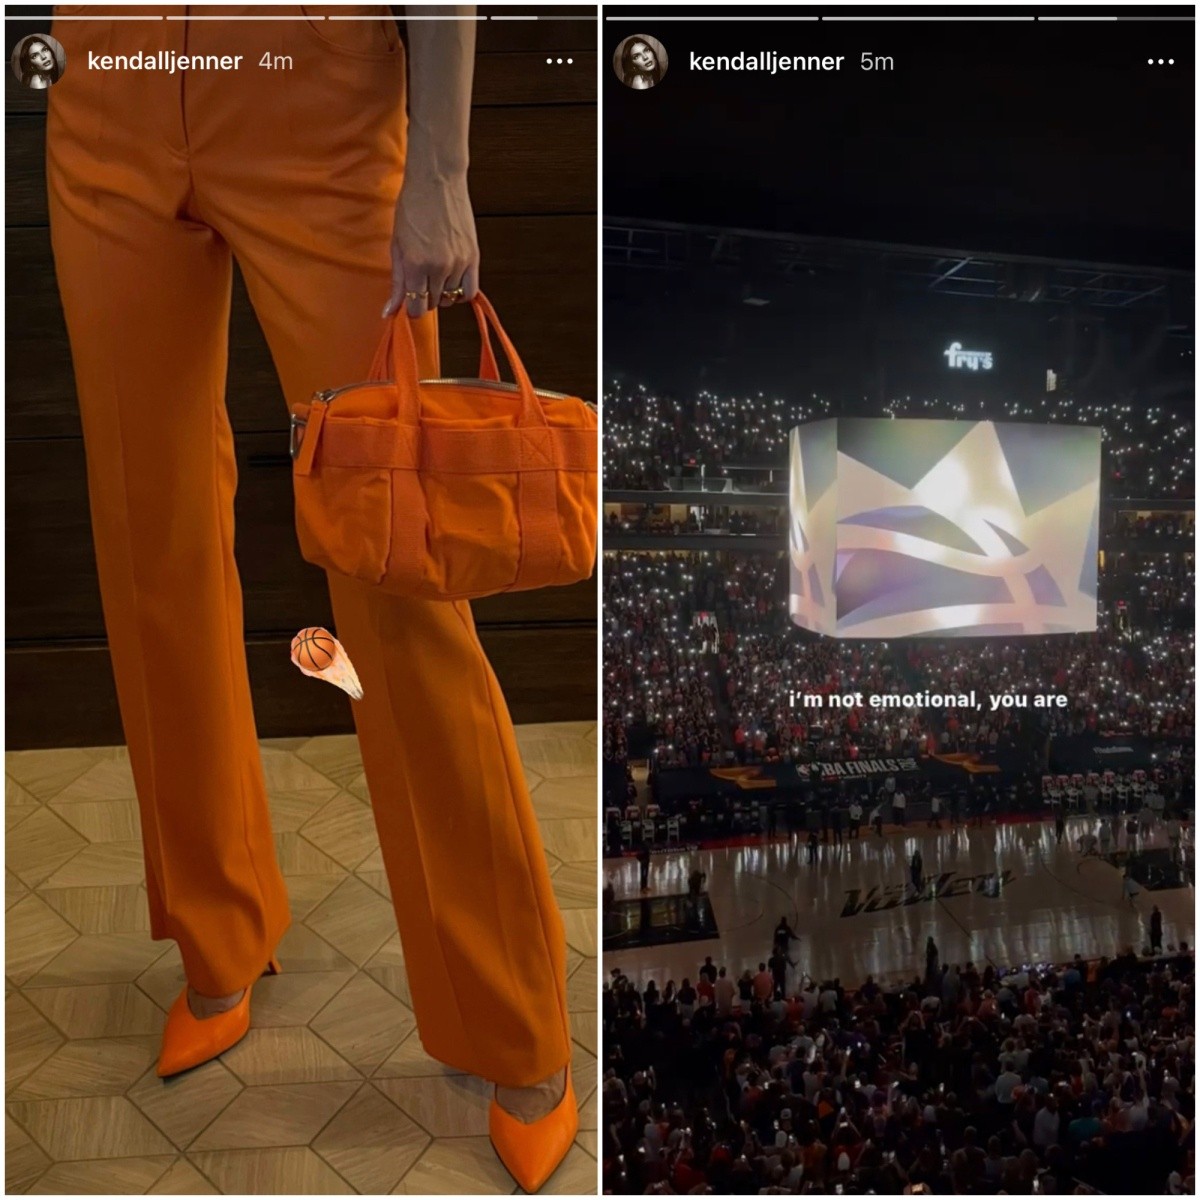 Kendall shows her support for Devin Booker